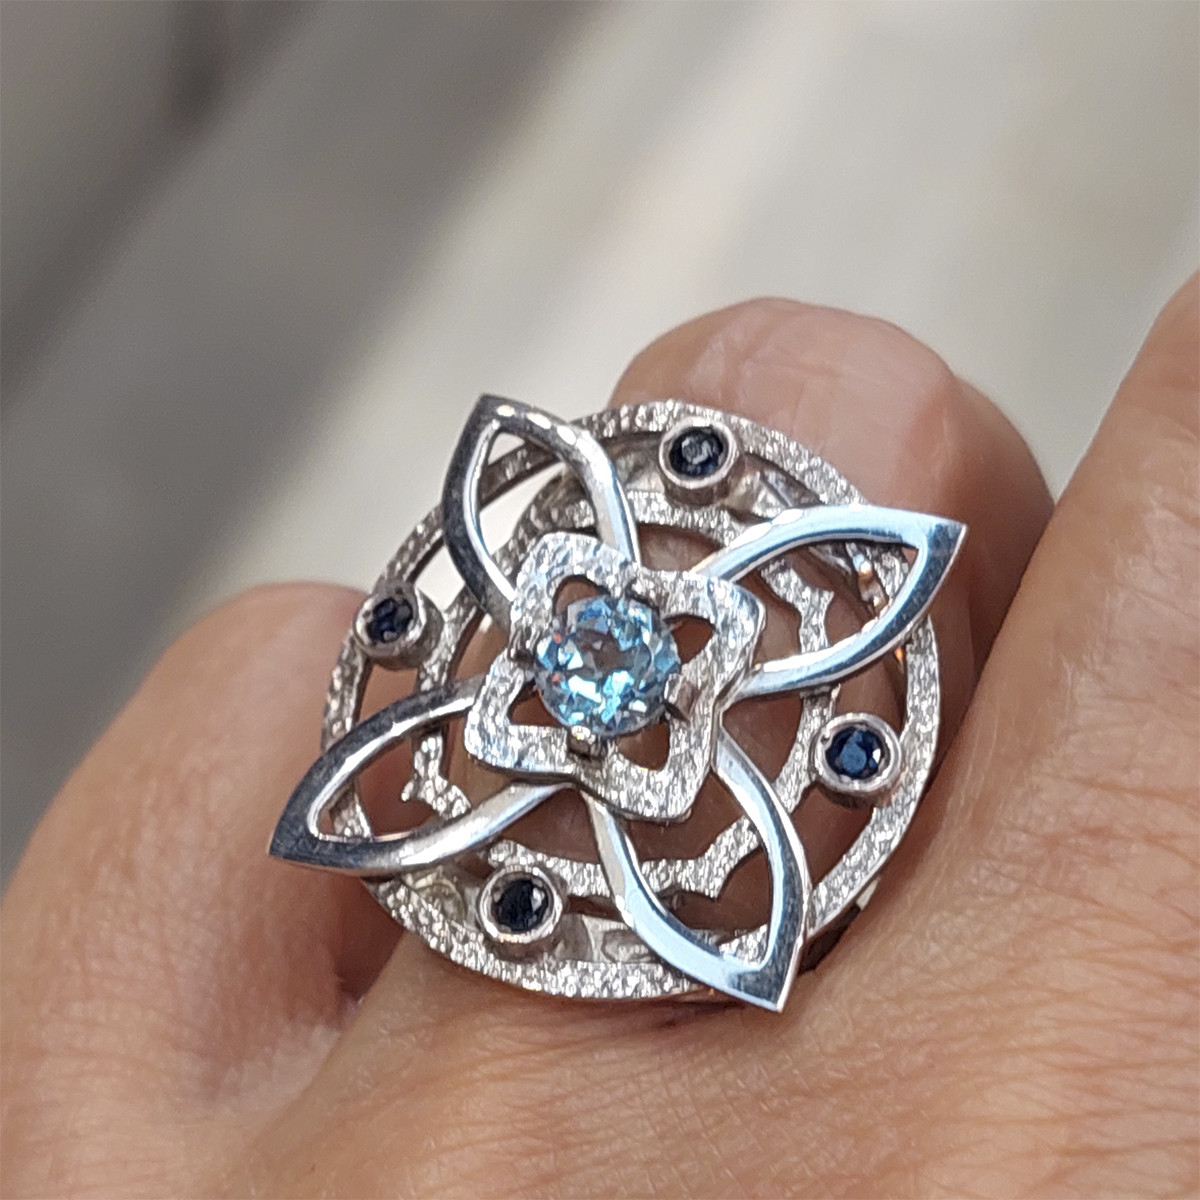 SILVER FLOWER RING AND SAPPHIRES